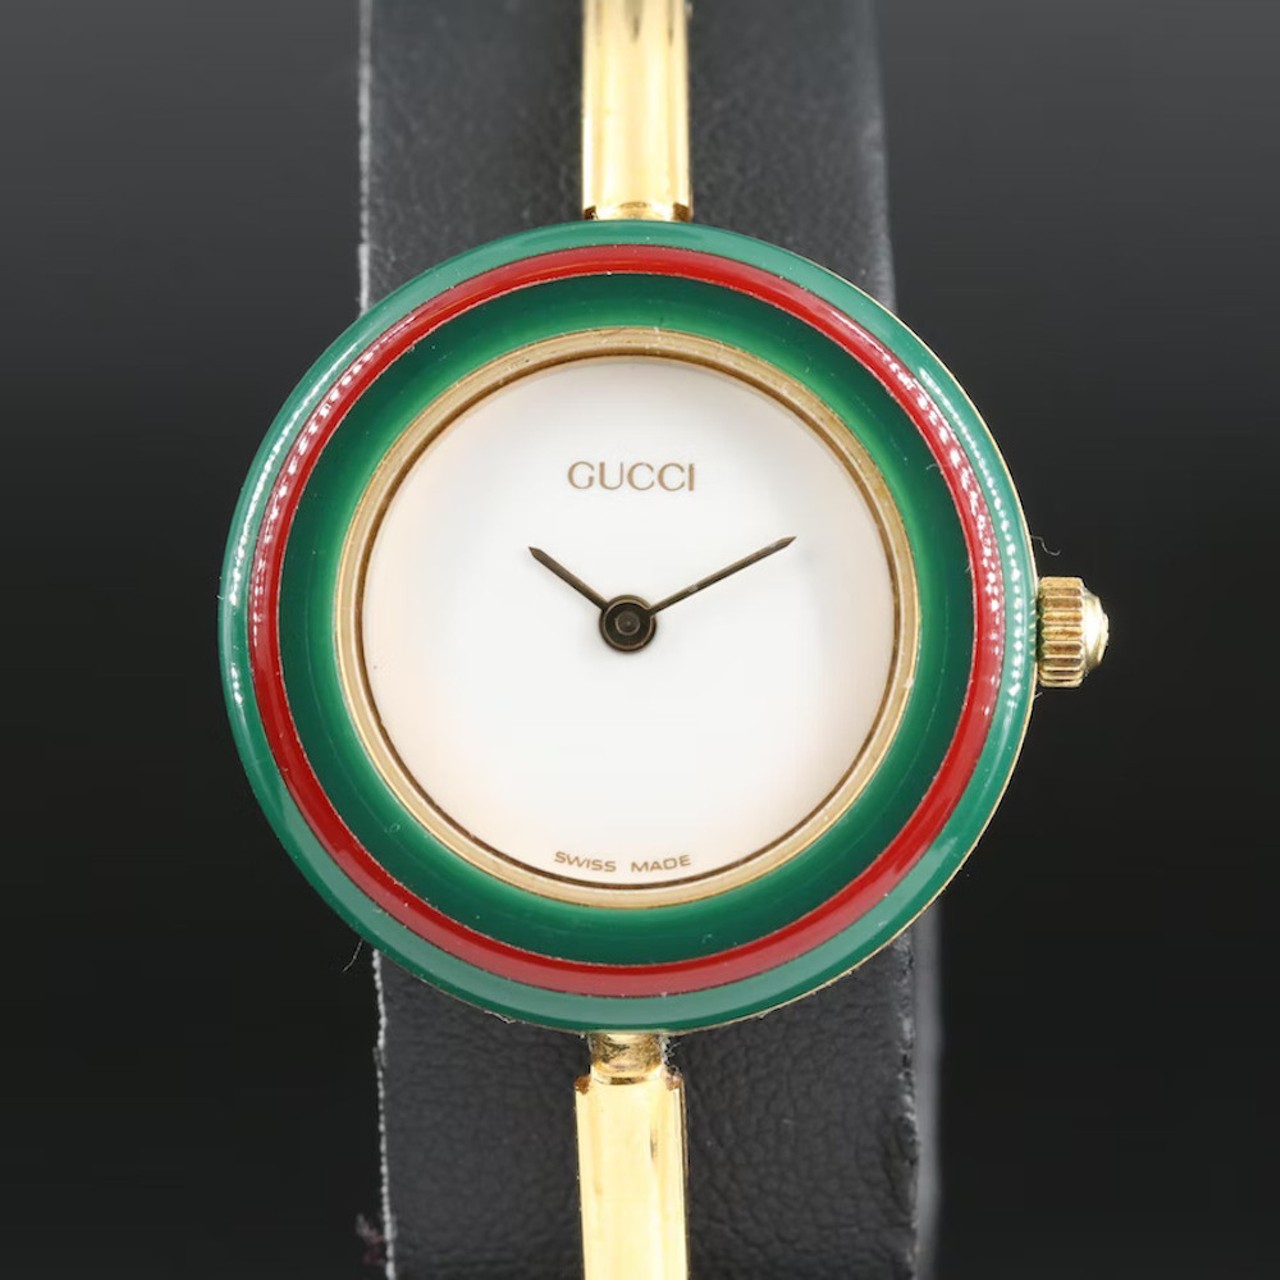 Gucci Bangle Wristwatch with Interchangeable Bezels
Father, son and house of Gucci – this bangle watch set is both timeless and trending on TikTok for its nifty interchangeable colored faces. Albeit a little beat up, the watch comes with all the original packaging, but the watch itself seems to be in great shape.